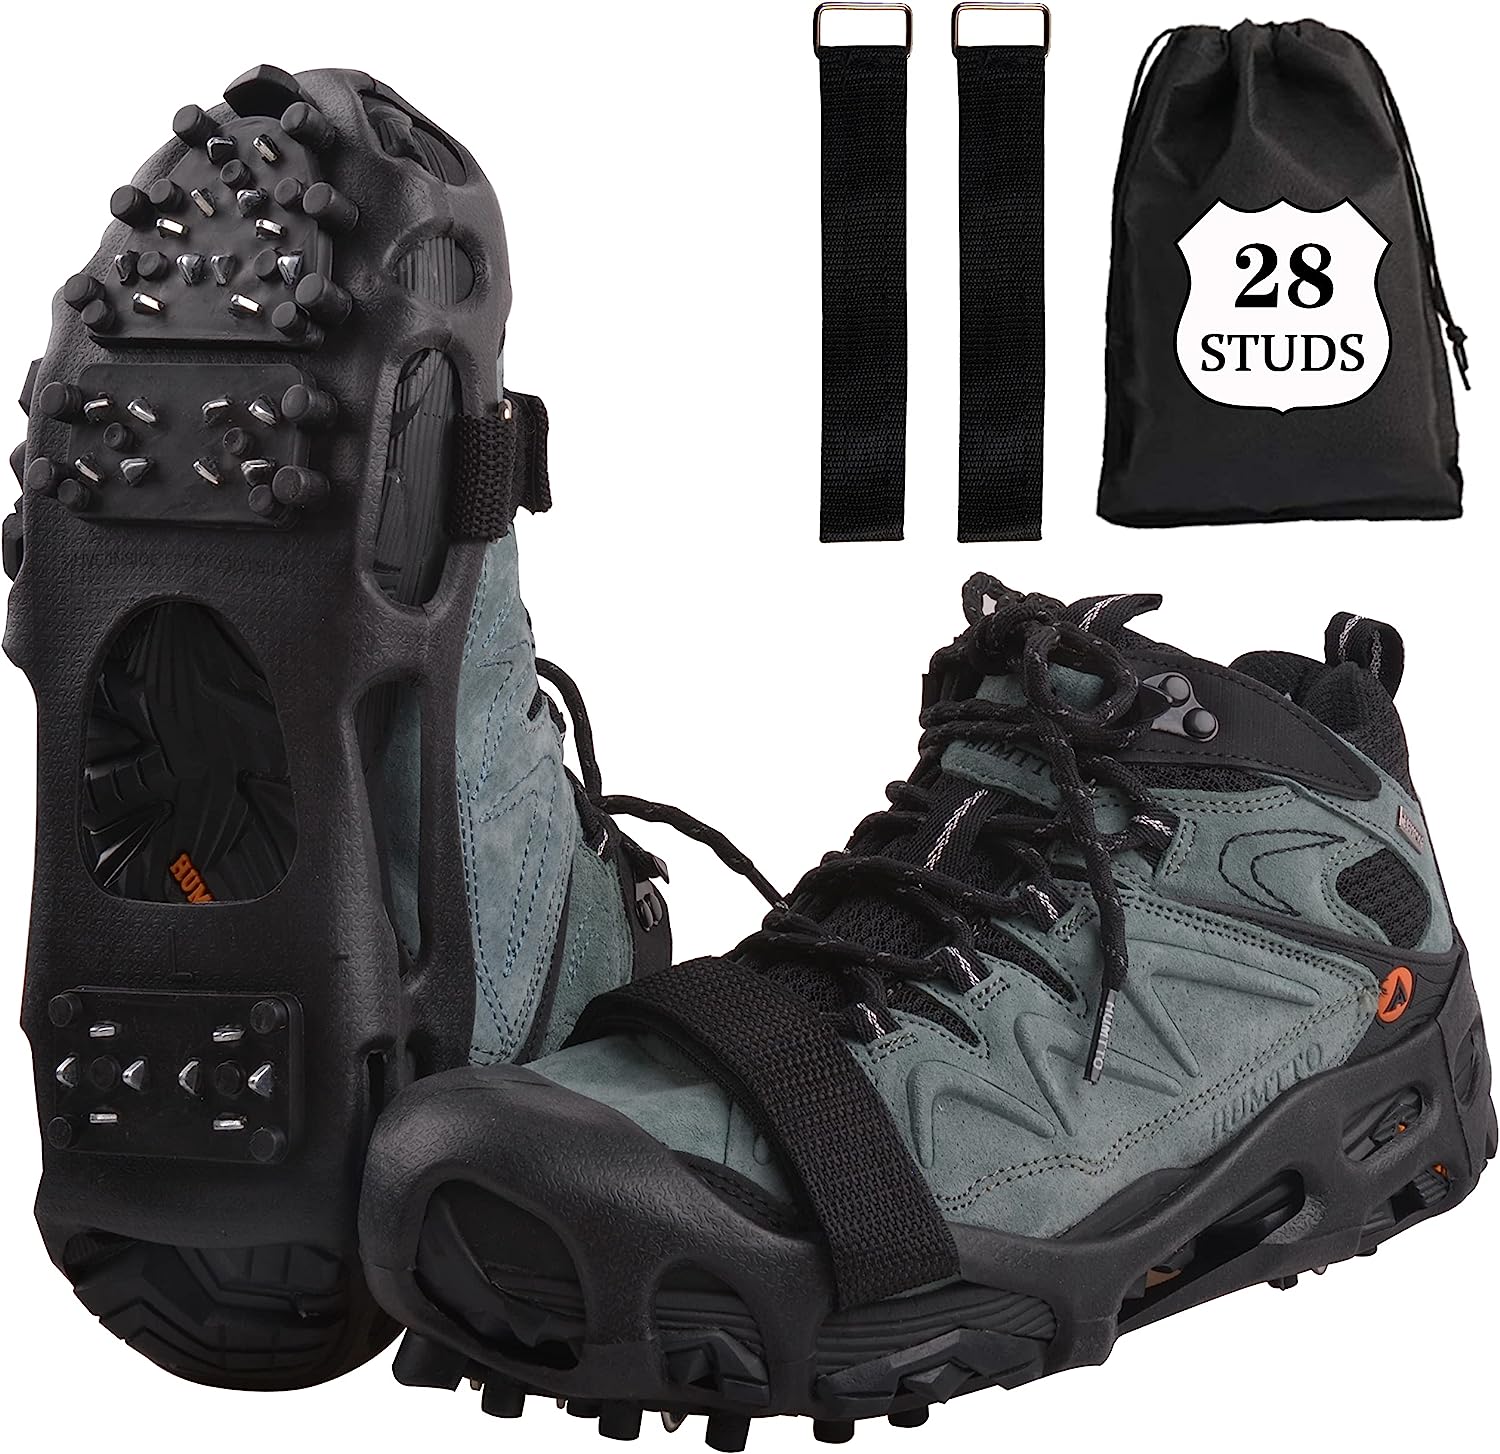 Ice Cleats Snow Walk Traction Cleats Crampon for [...]